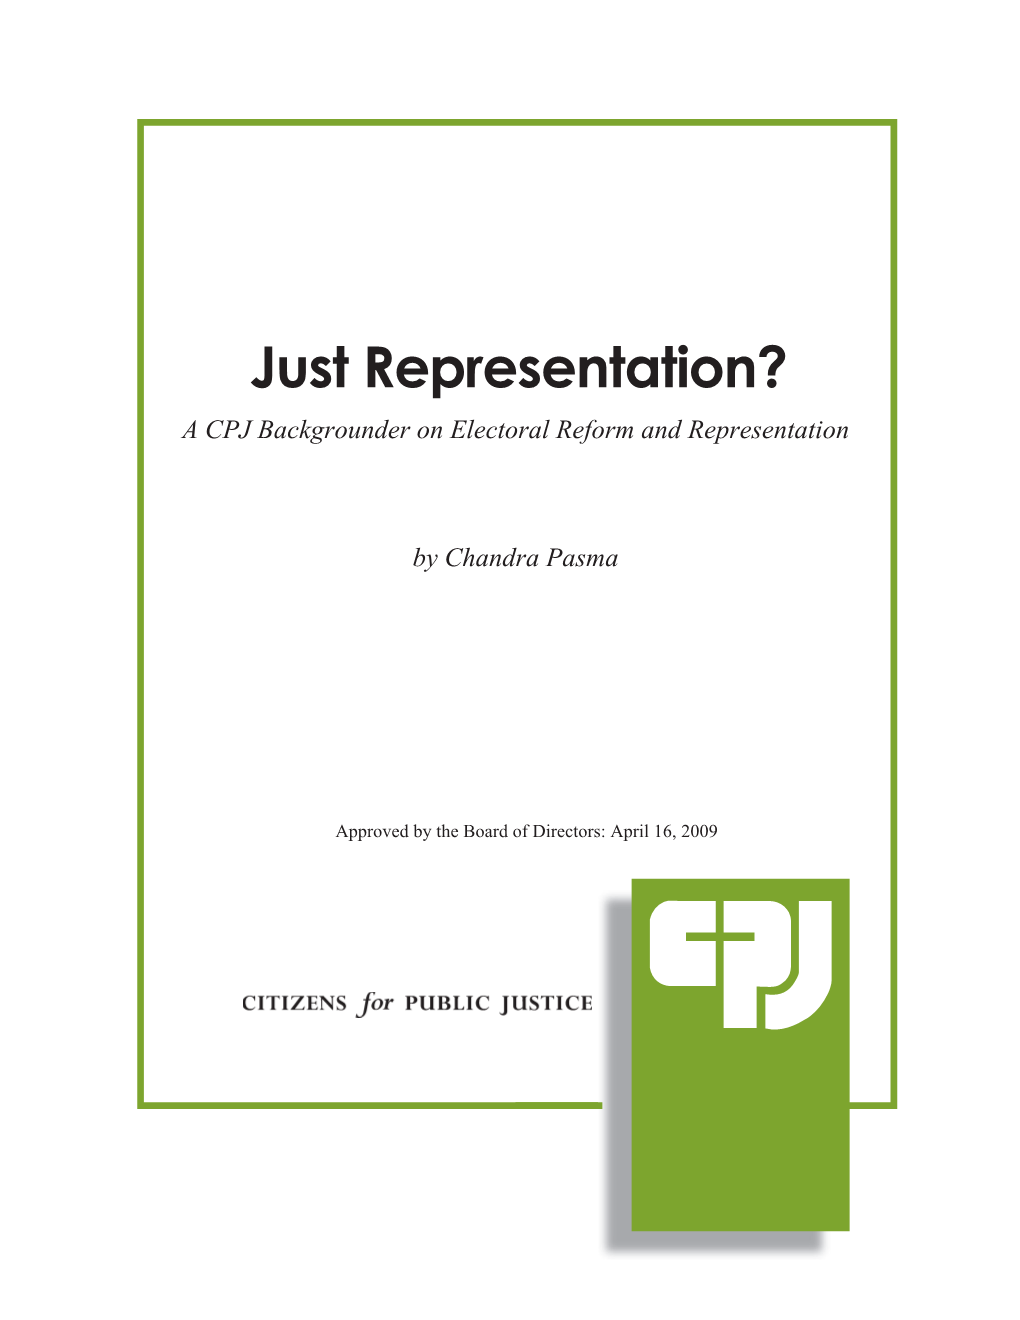 Just Representation? a CPJ Backgrounder on Electoral Reform and Representation